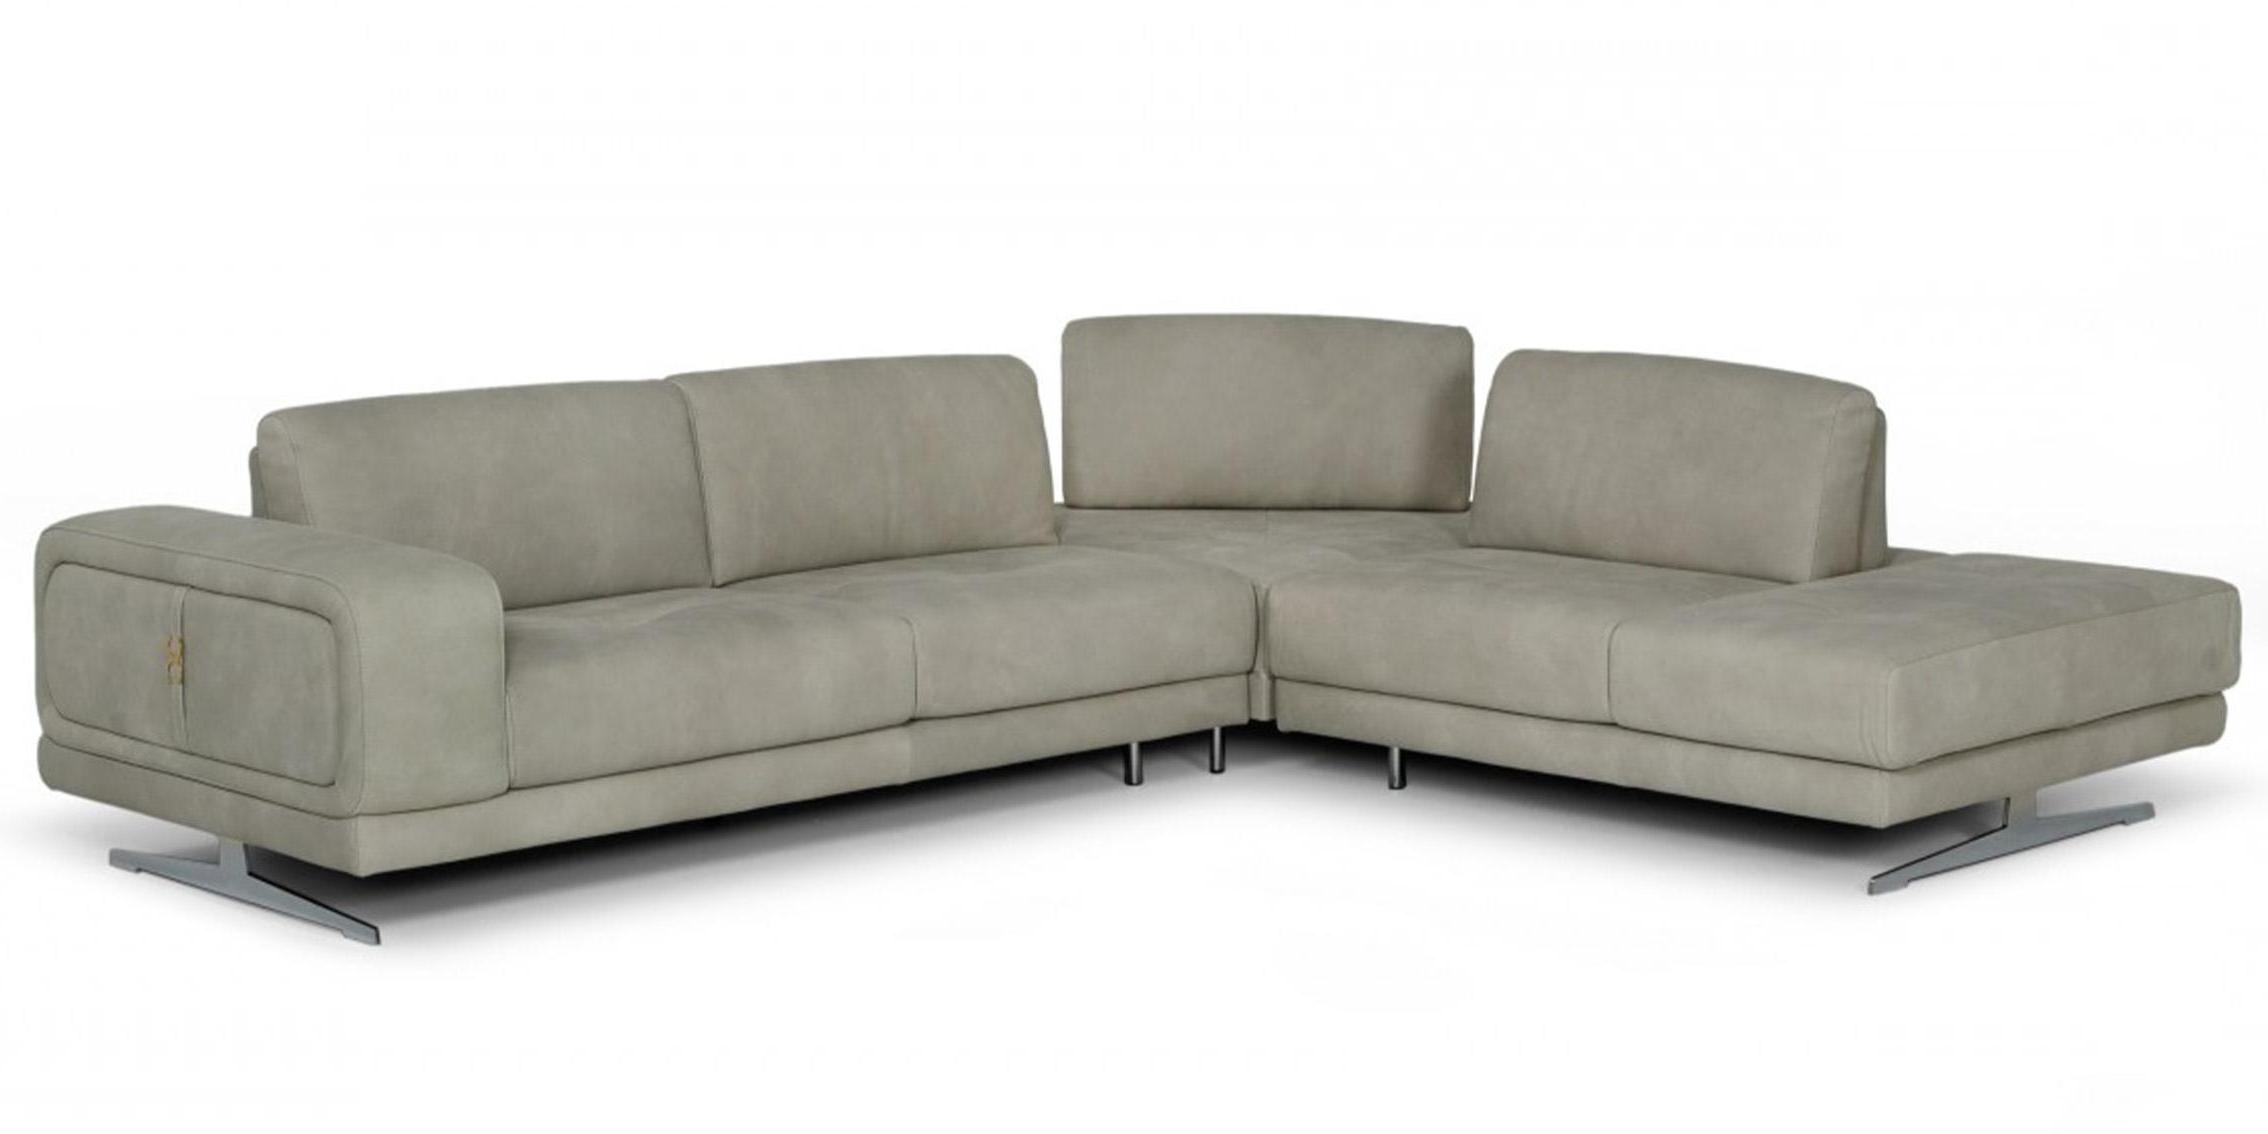 

    
GREY Nubuck Leather Sectional RIGHT Coronelli Collezioni Mood VIG Made in Italy
